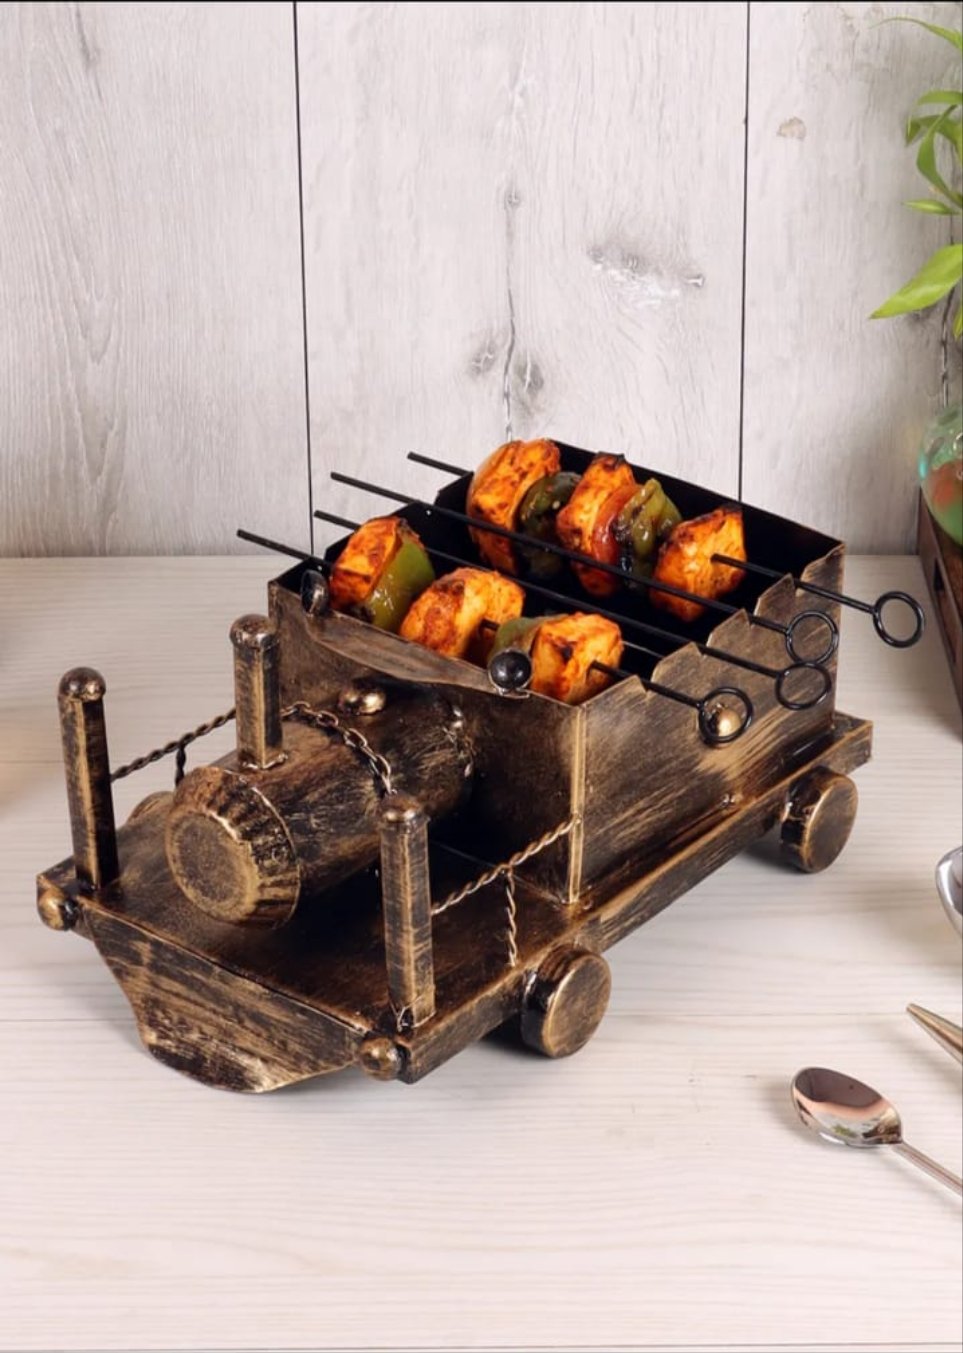 Train Barbeque with Skewers idekors